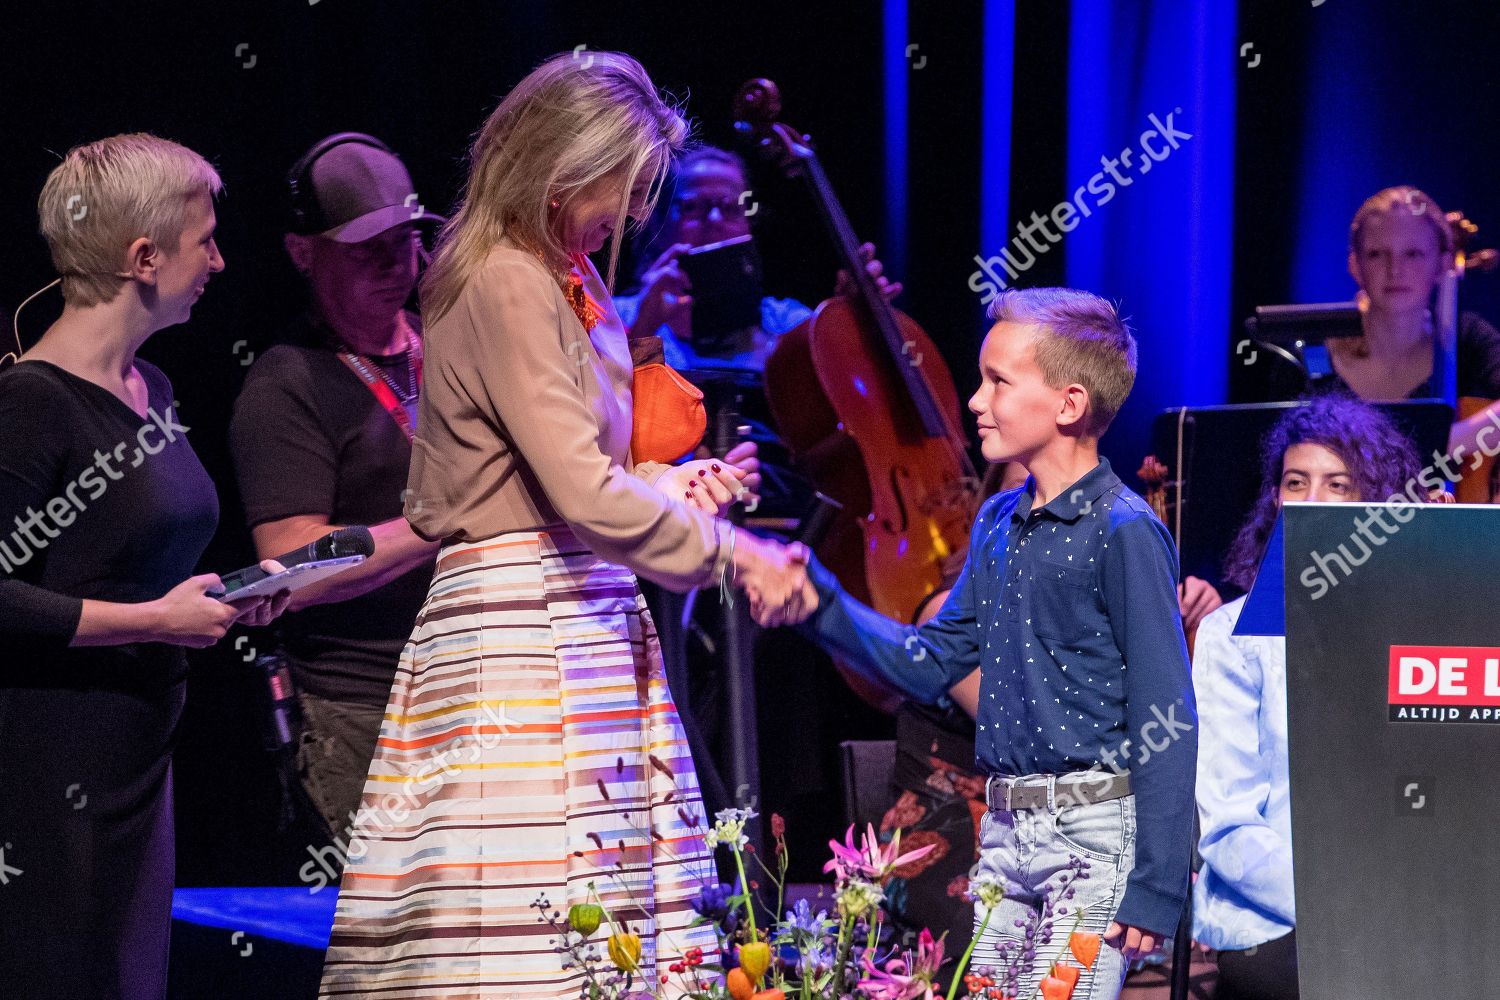 signing-of-the-cooperation-agreement-for-music-education-drachten-the-netherlands-shutterstock-editorial-9887703e.jpg